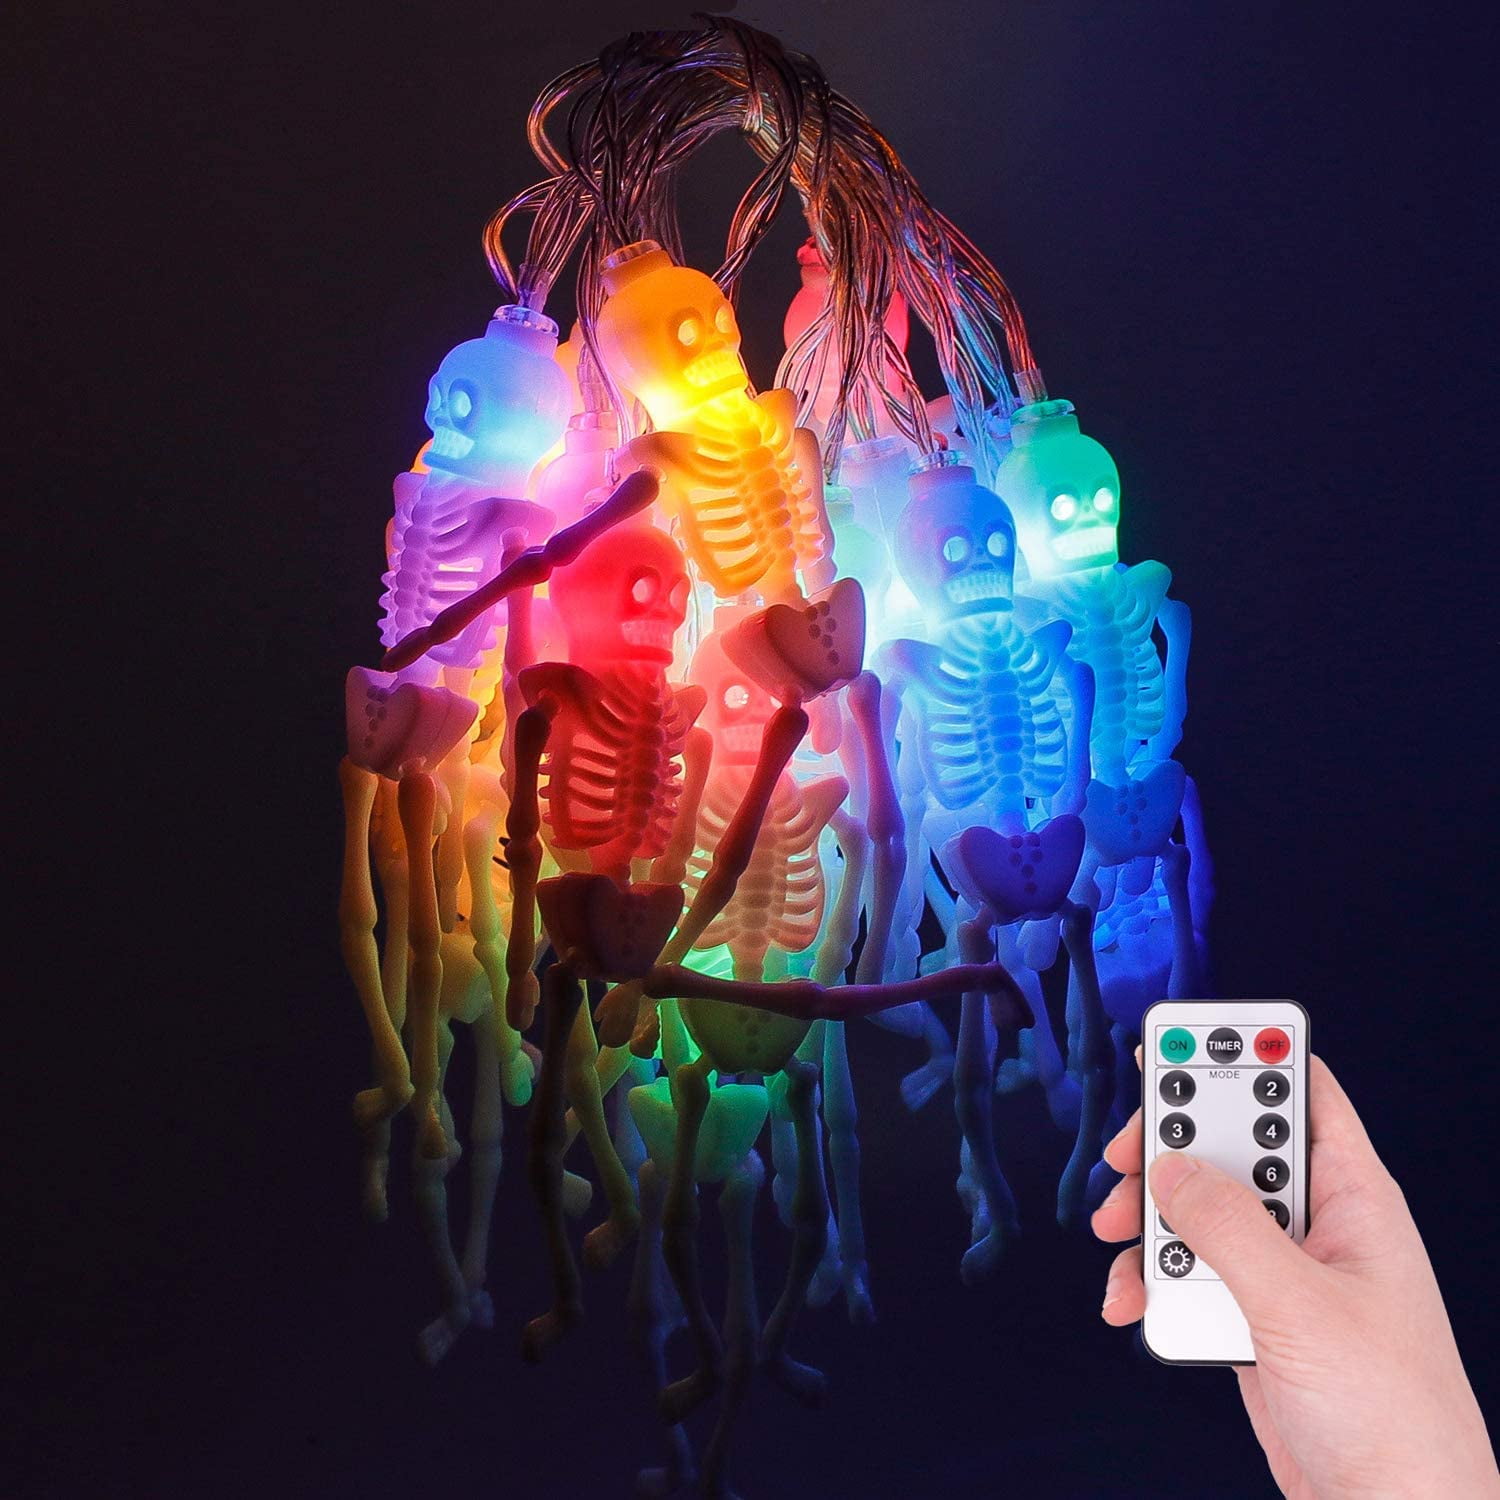 Used in Haunted Houses Window Party Create a Halloween Horror Atmosphere Multicolor Halloween Skull Decoration String Lights 20LED Outdoor and Indoor with Remote Control Waterproof Battery Operated